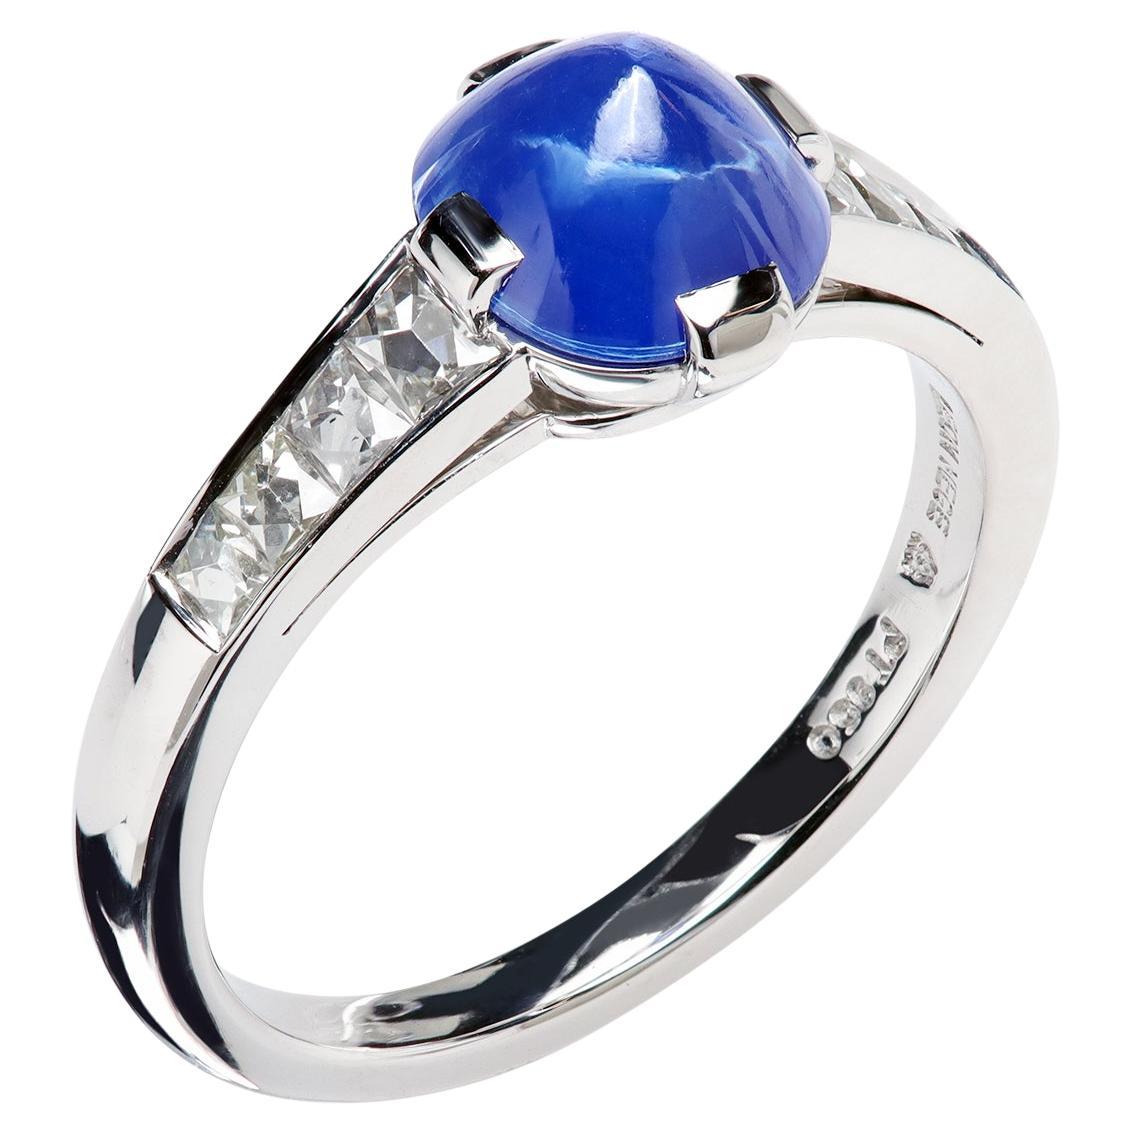 Leon Mege ring with certified Kahmir sugarloaf sapphire and French cut diamonds For Sale